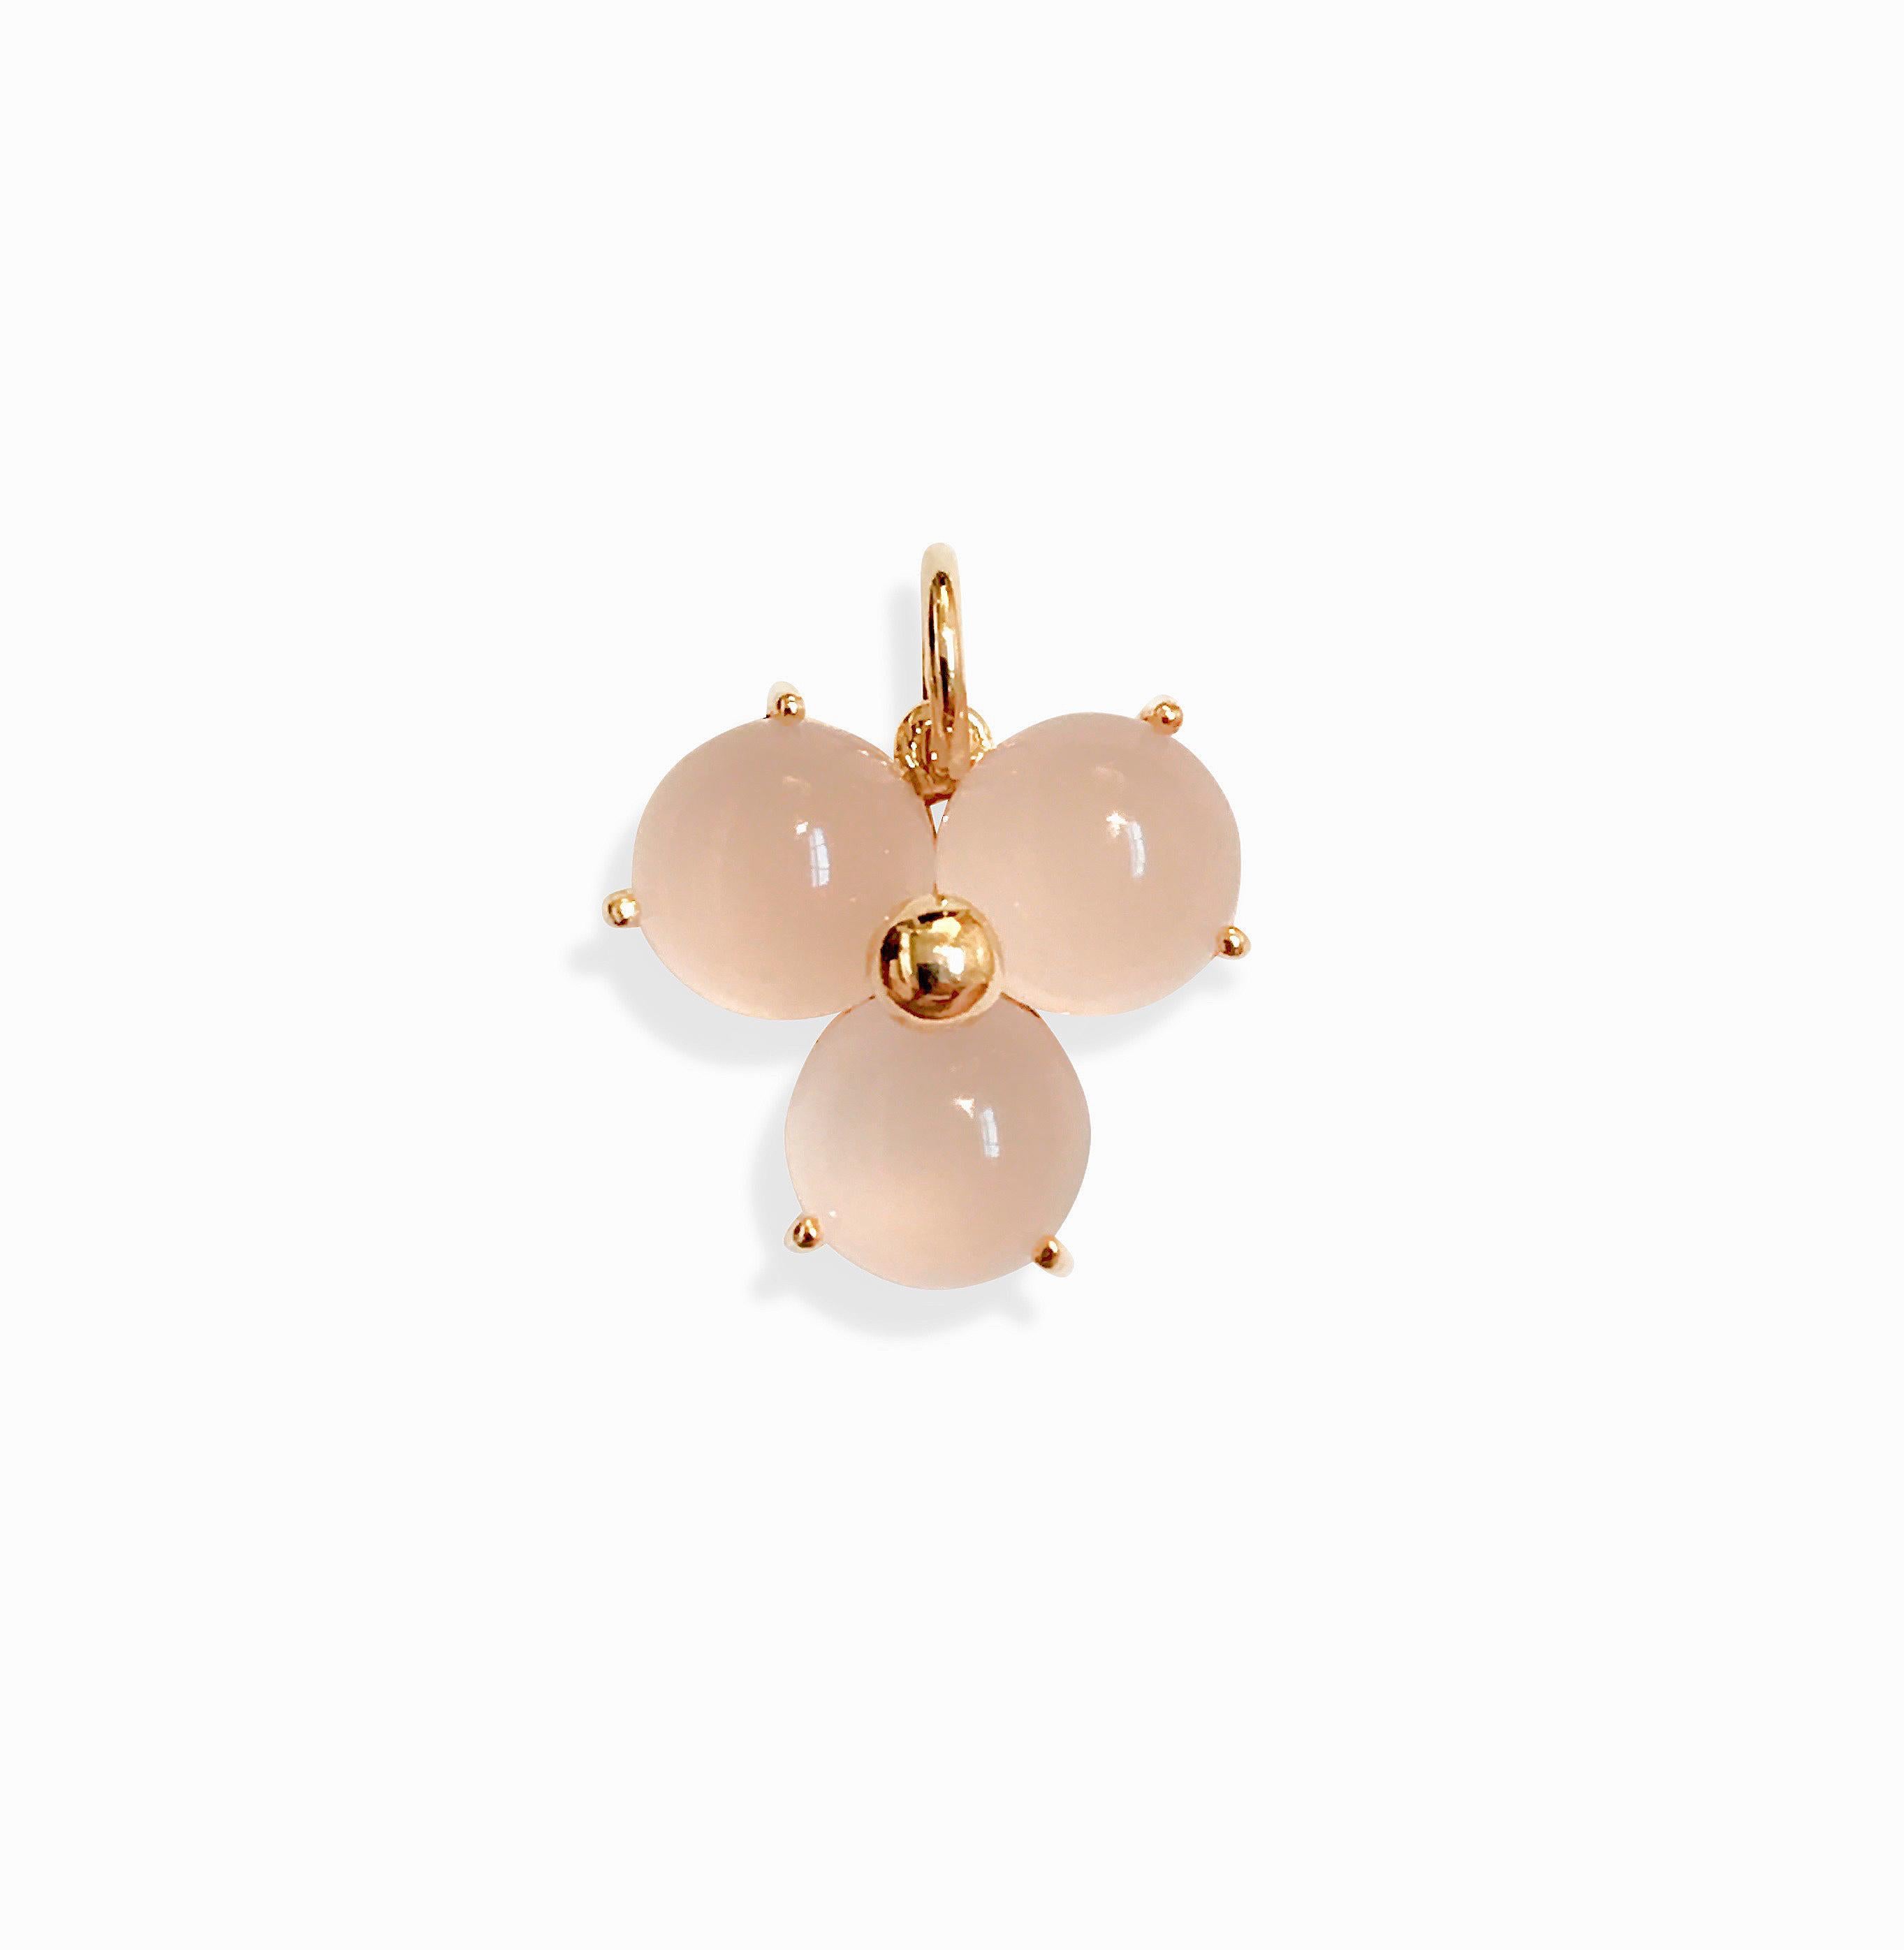 Handmade pendant made of 18 karat solid yellow gold and light pink cabochon-cut chalcedony stones. 
The chain can also be used with other pendants or just by itself. 
Hallmark: London Goldsmiths’ Company –  Assay Office
Pendant's width: 13.50